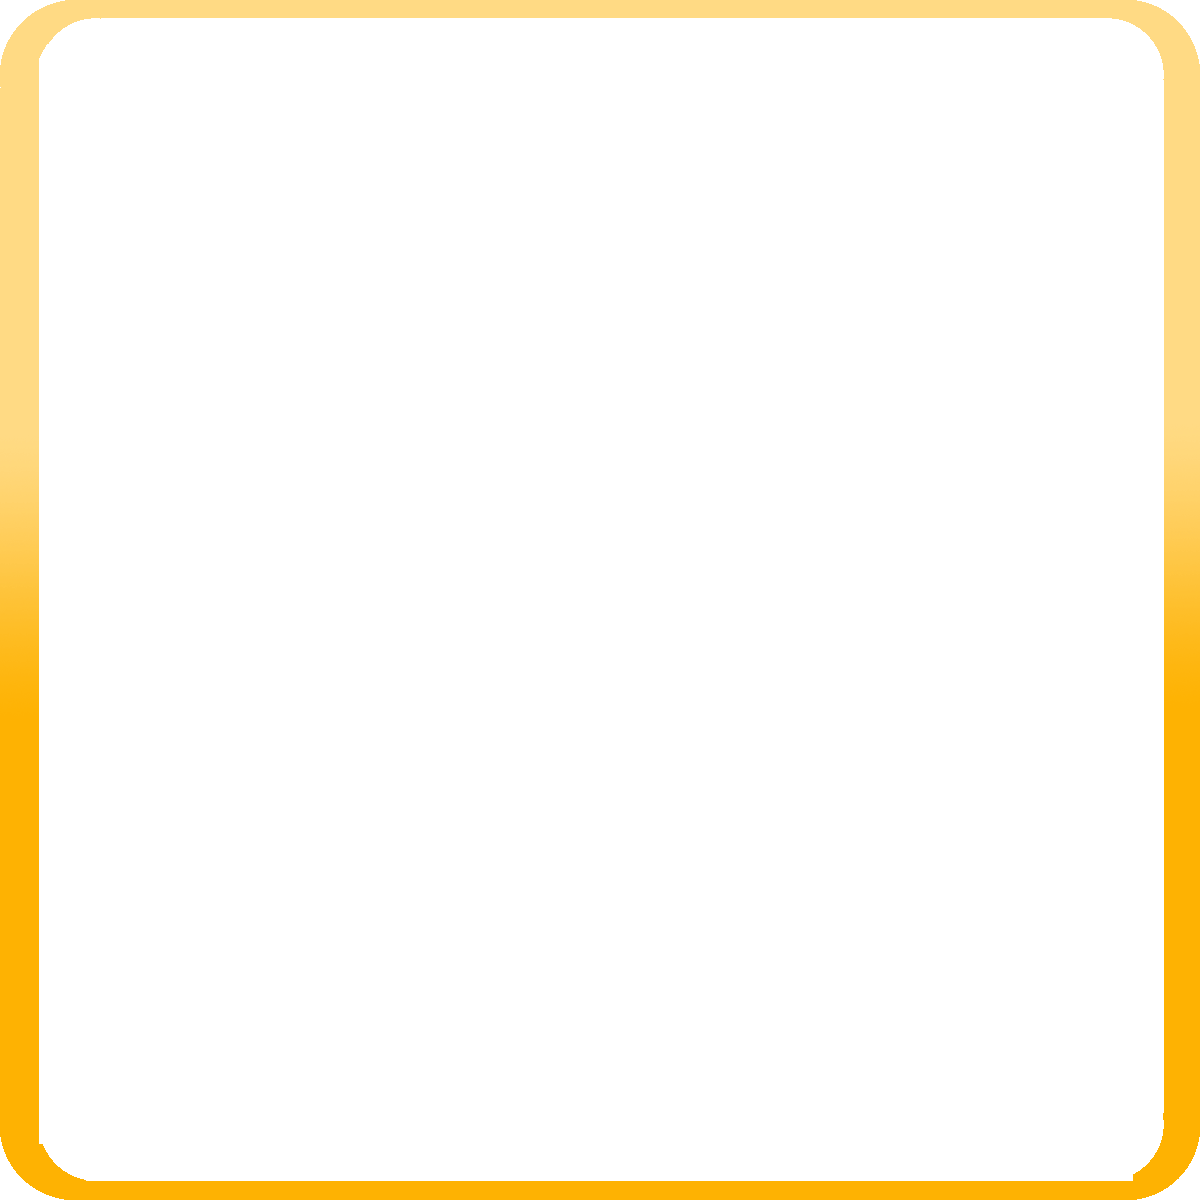 Gold Certificate Page Borders - ClipArt Best